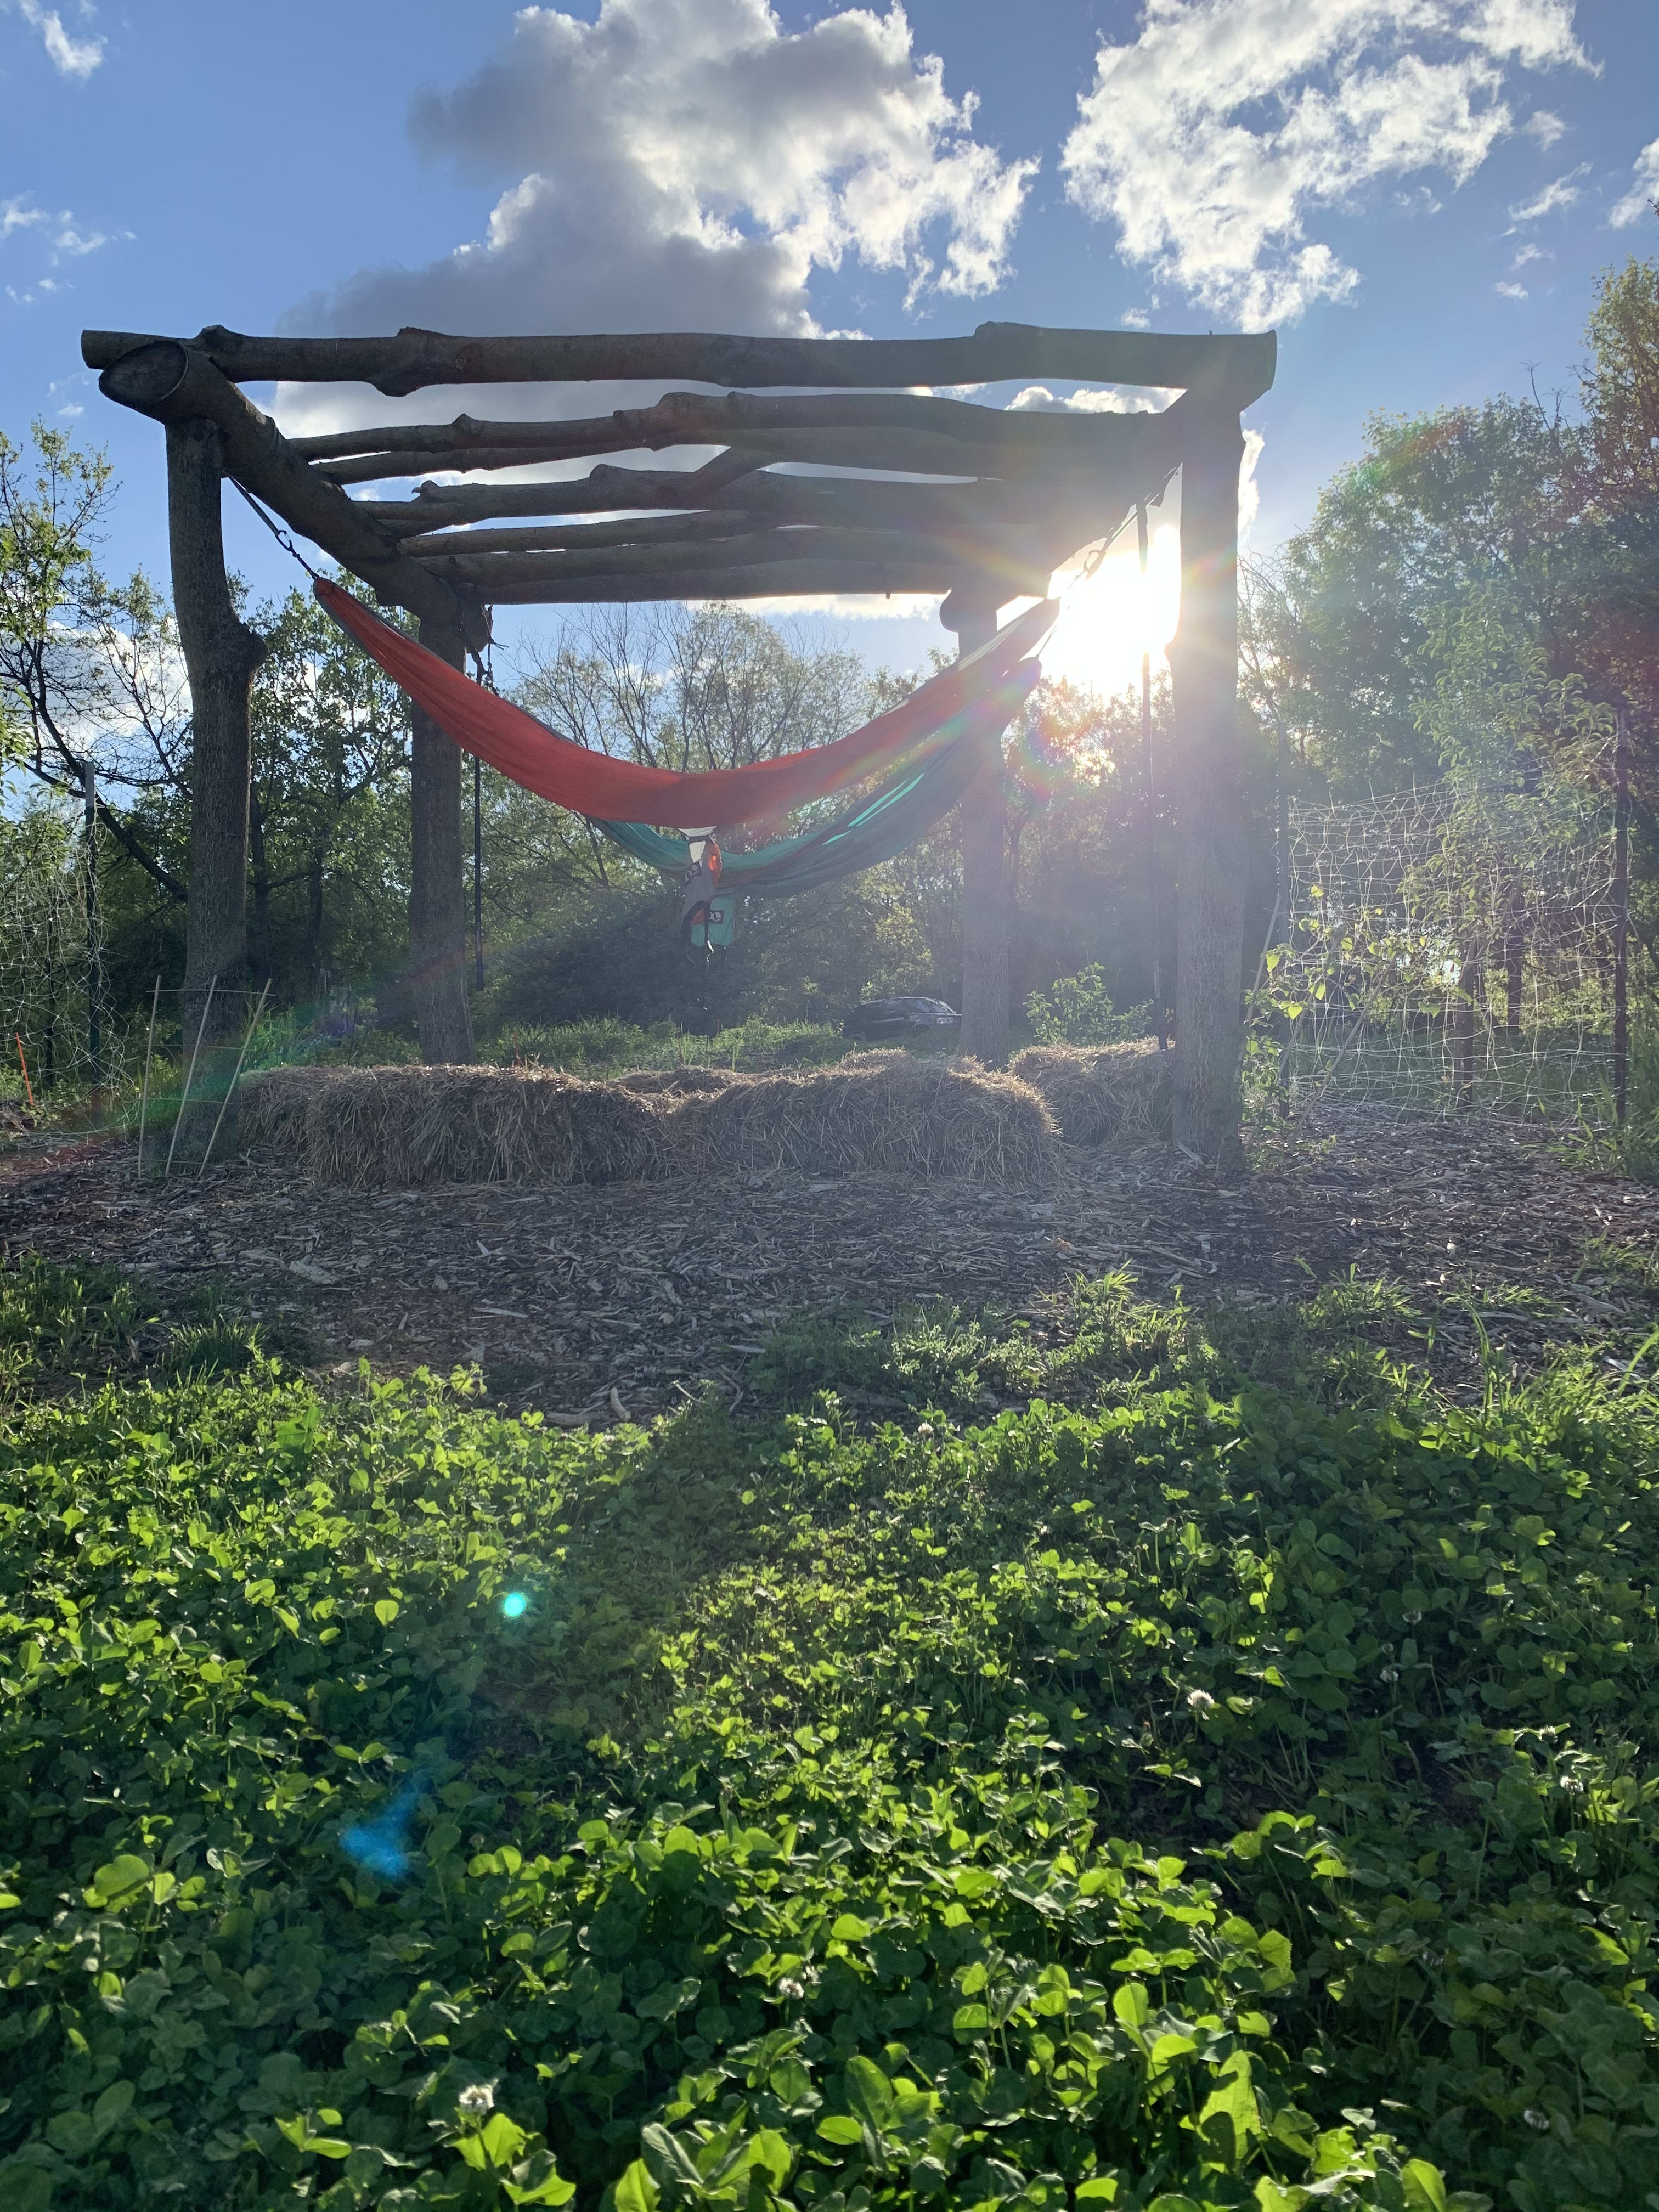 The hammocks were so nice to catch a breeze in and the sunset was beautiful.